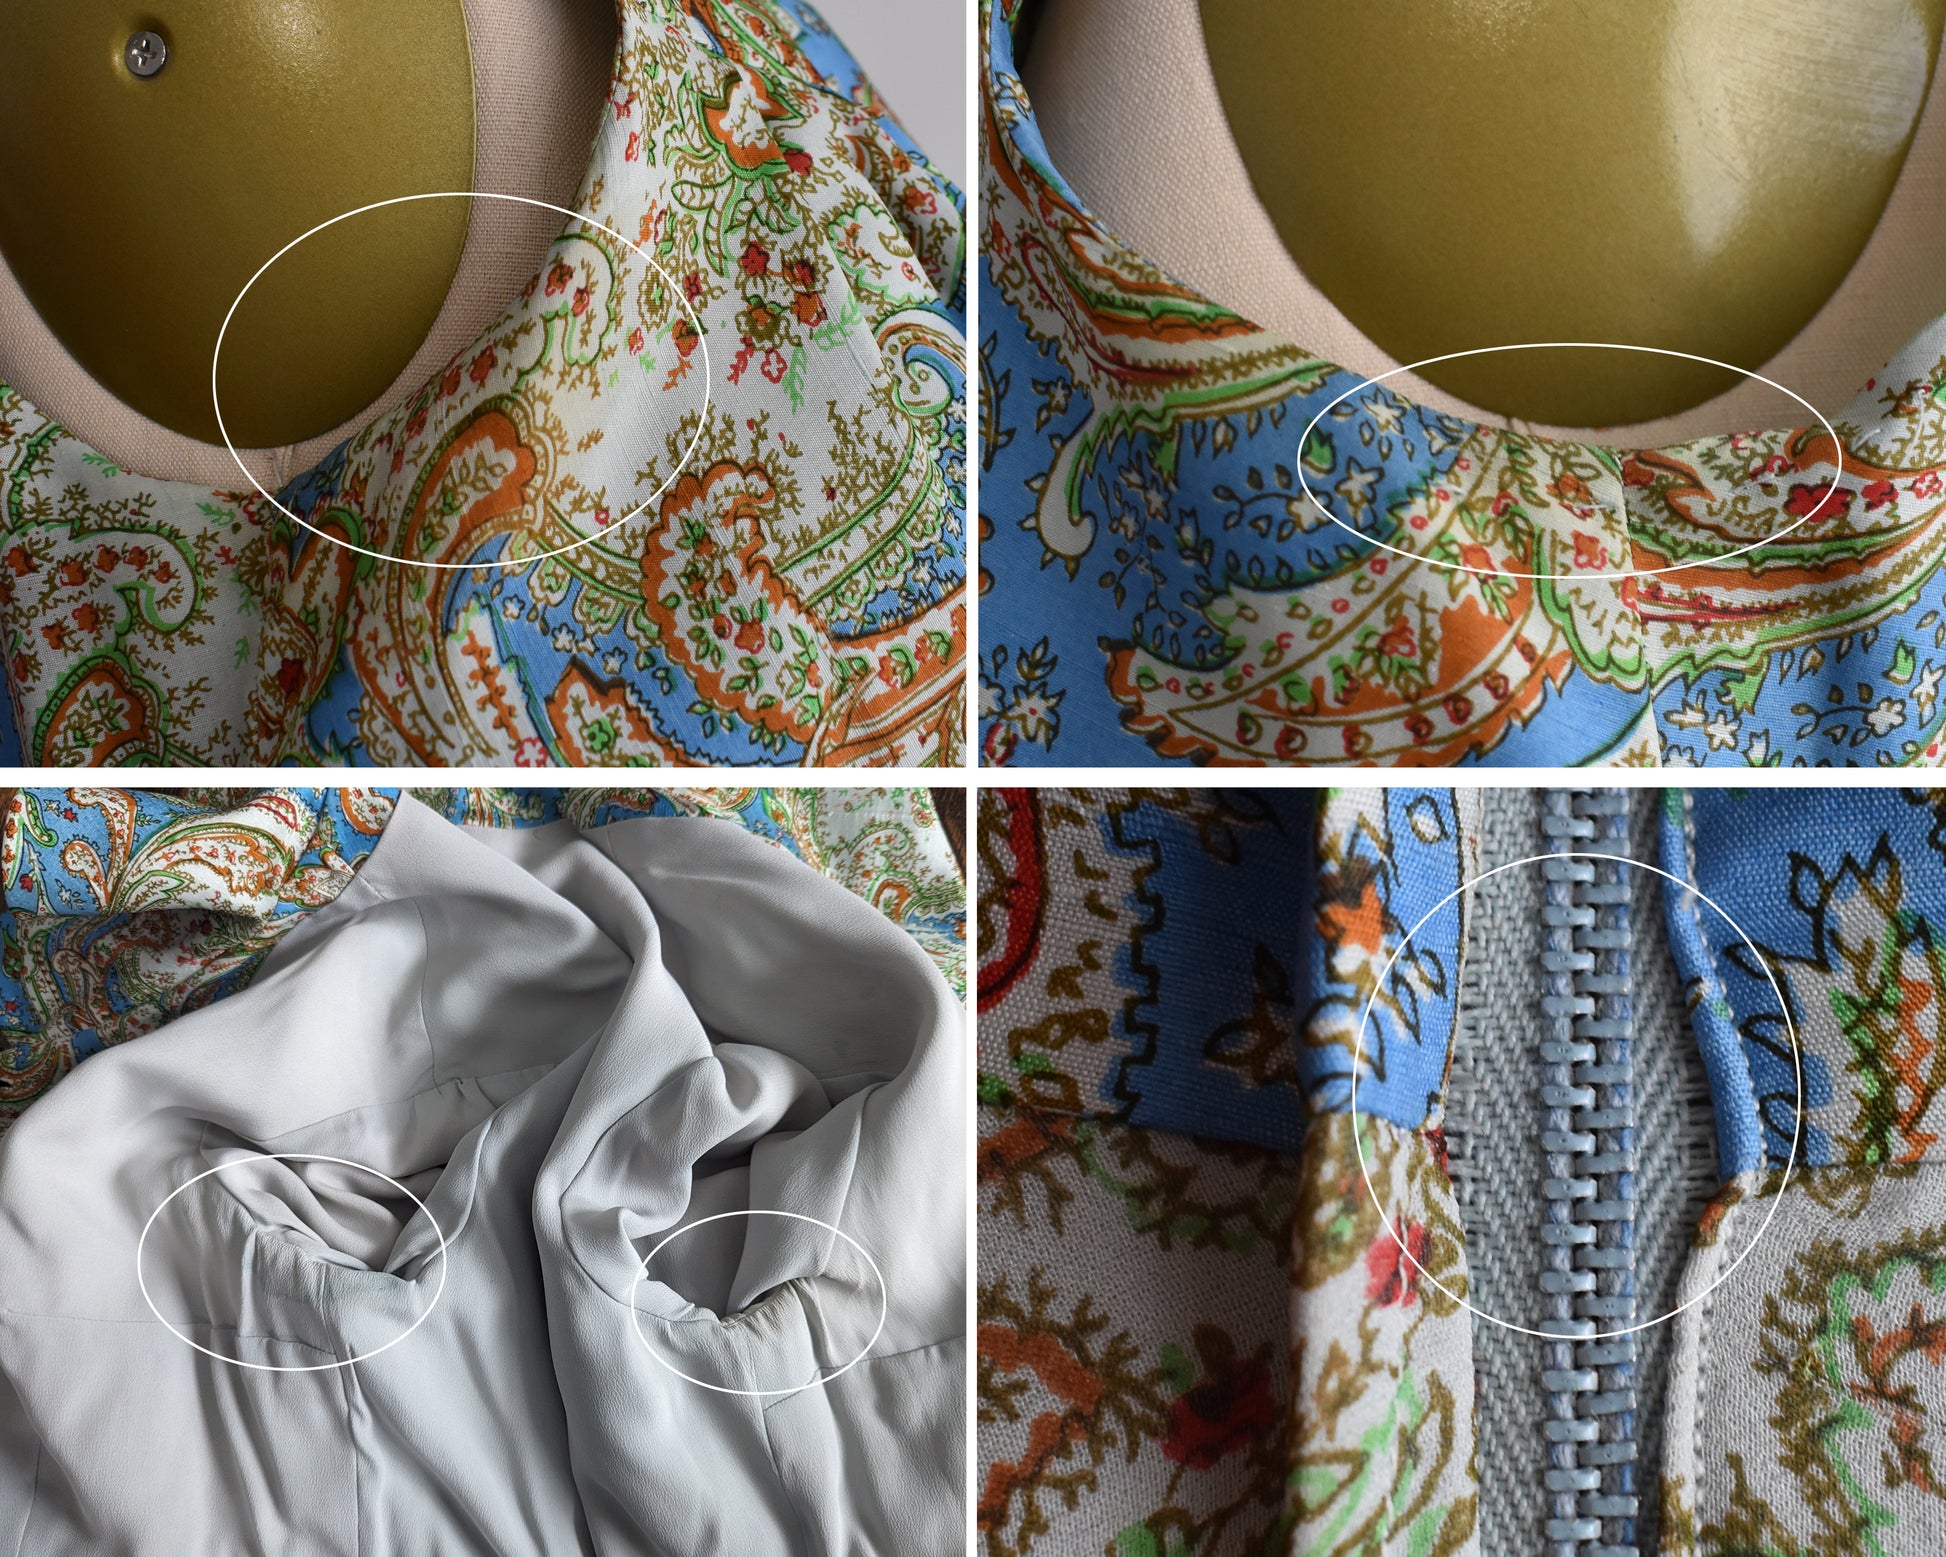 A photo collage of small flaw, which show some underarm discoloration on the dress and the jacket lining, and some seam stressing on the zipper